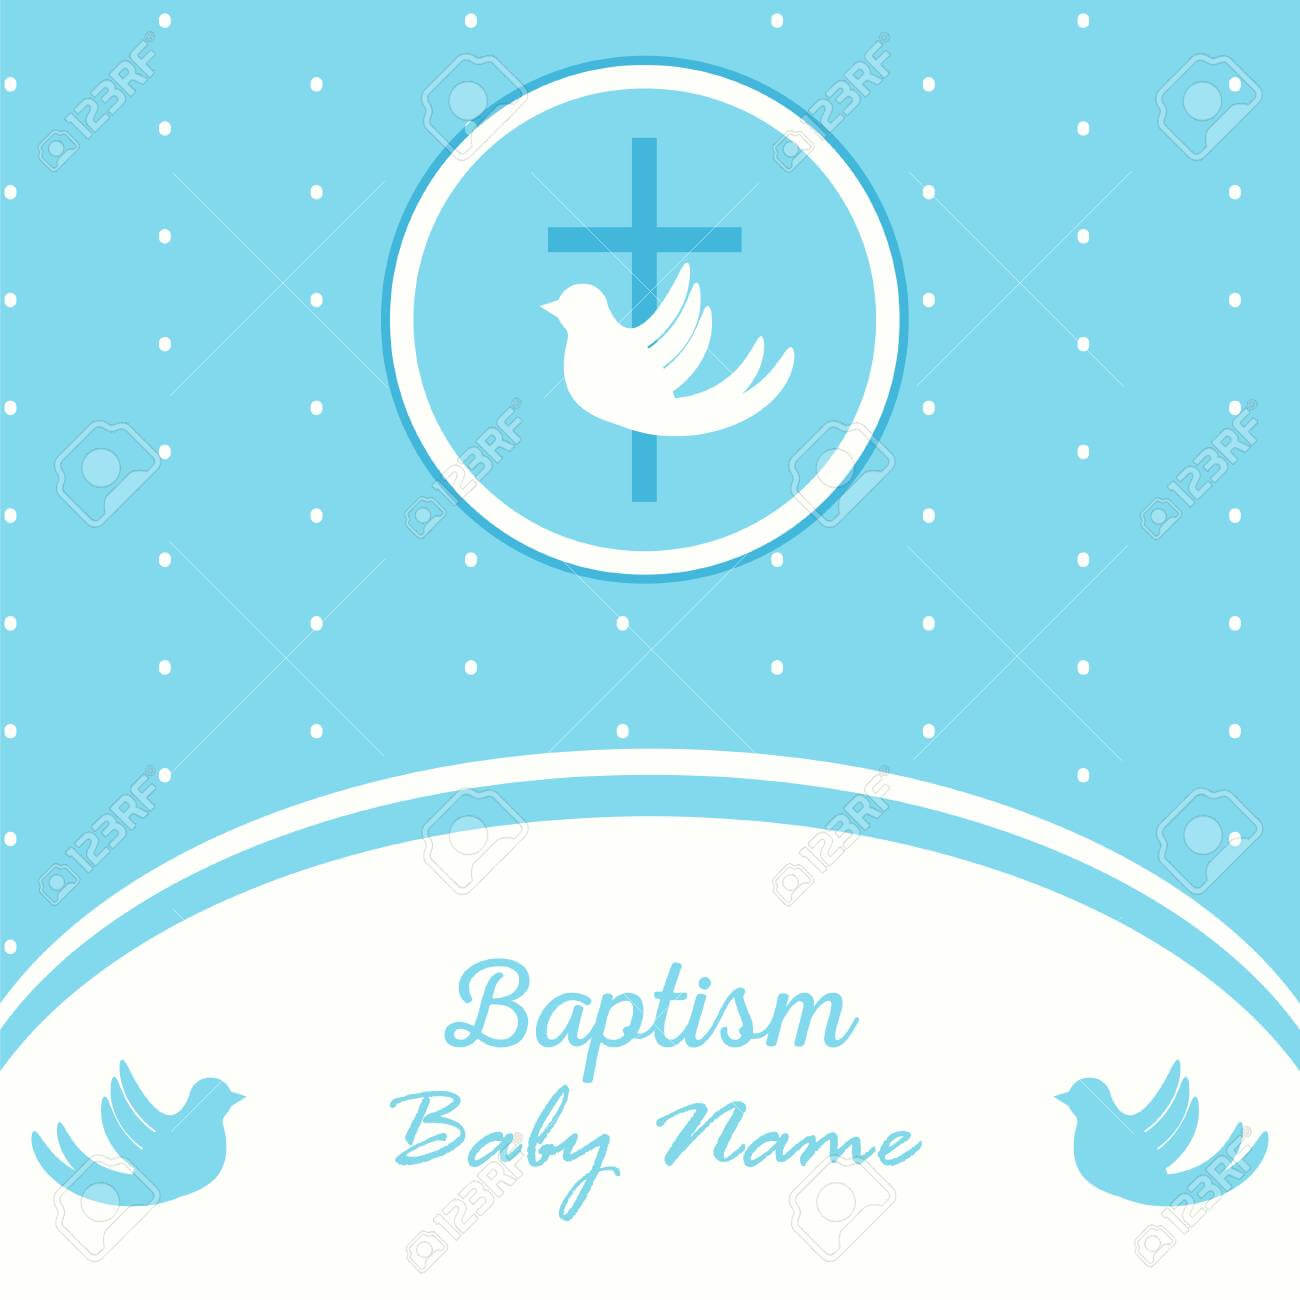 Baptism Invitation Card Template. Stock Vector Illustration For.. Regarding Baptism Invitation Card Template